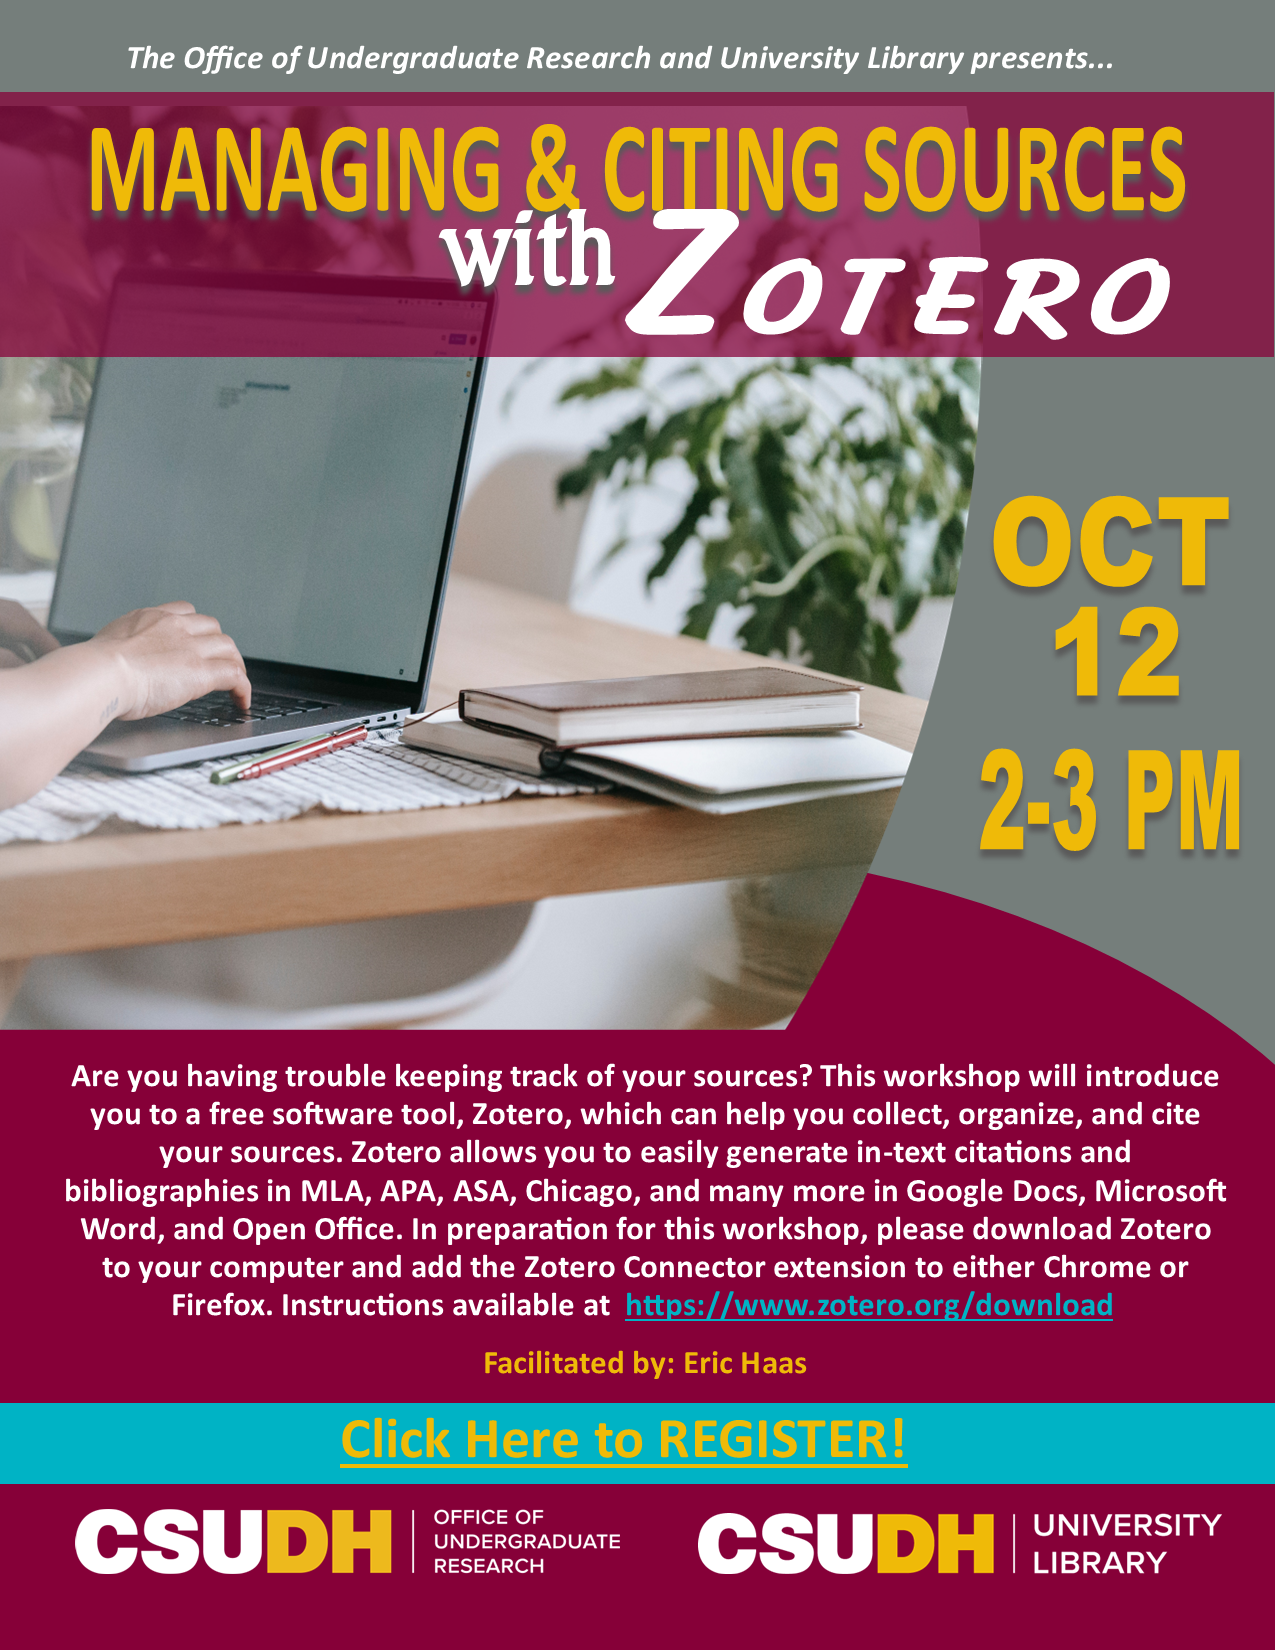 Managing & Citing Sources with Zotero 10-12-21